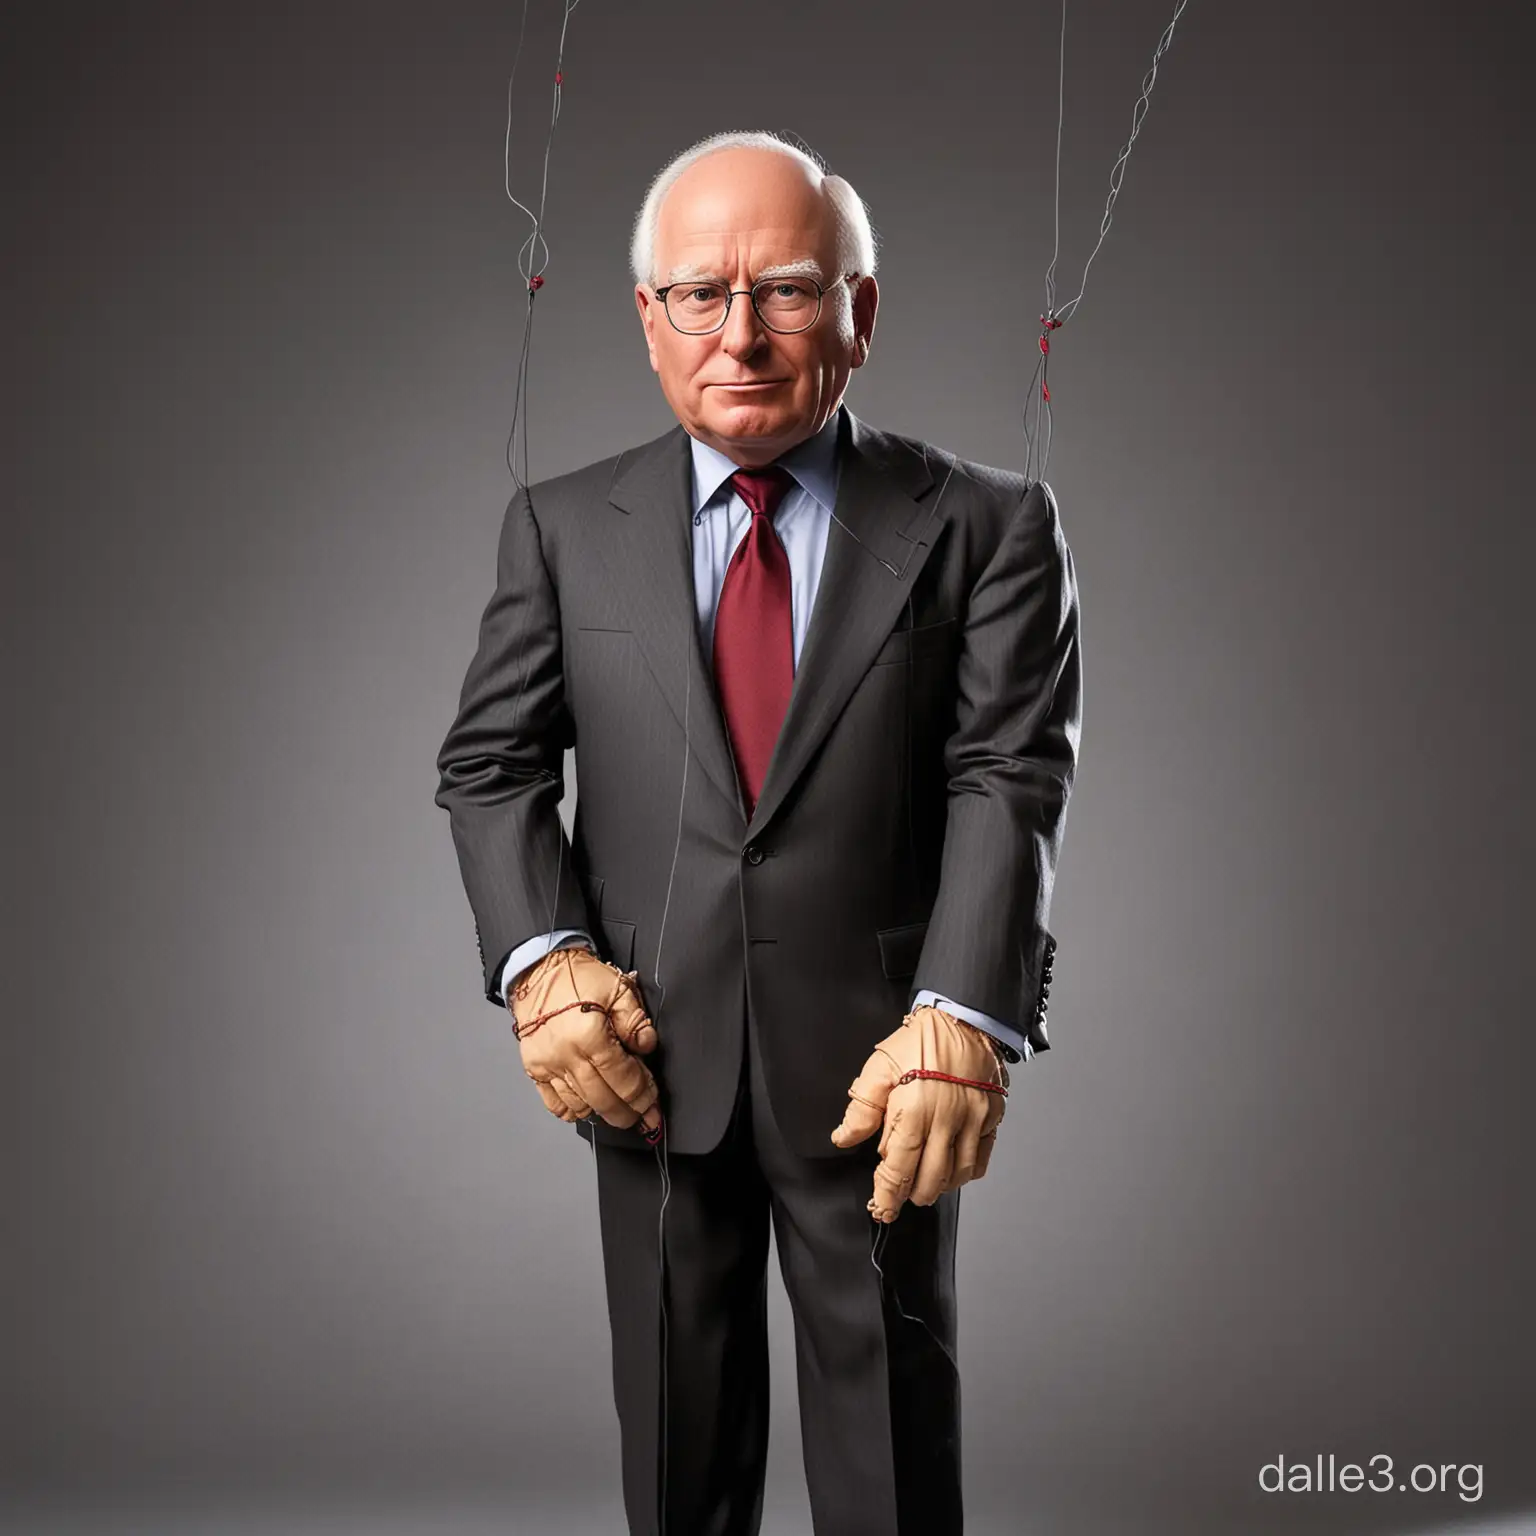 Dick Cheney is being controlled like a puppet by strings. Full-body shot.